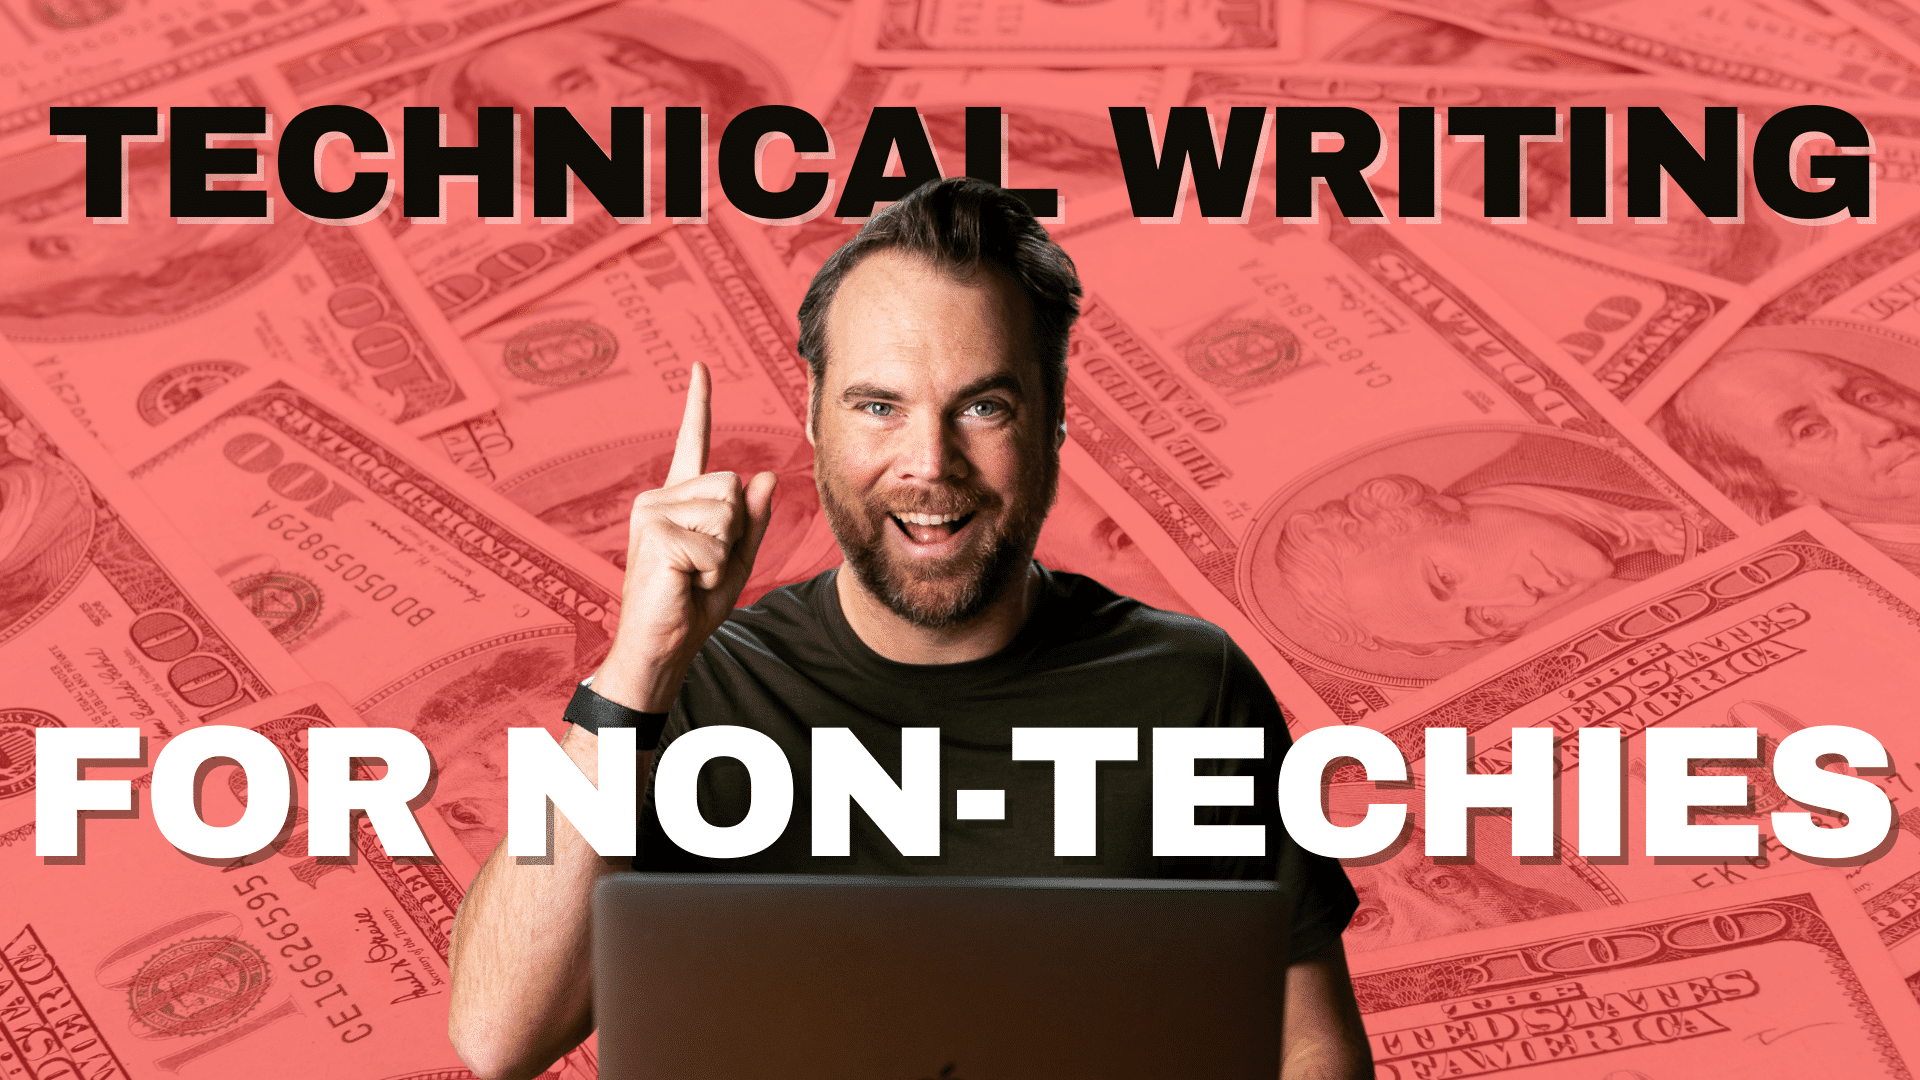 Freelance Technical Writing for Non-Techies